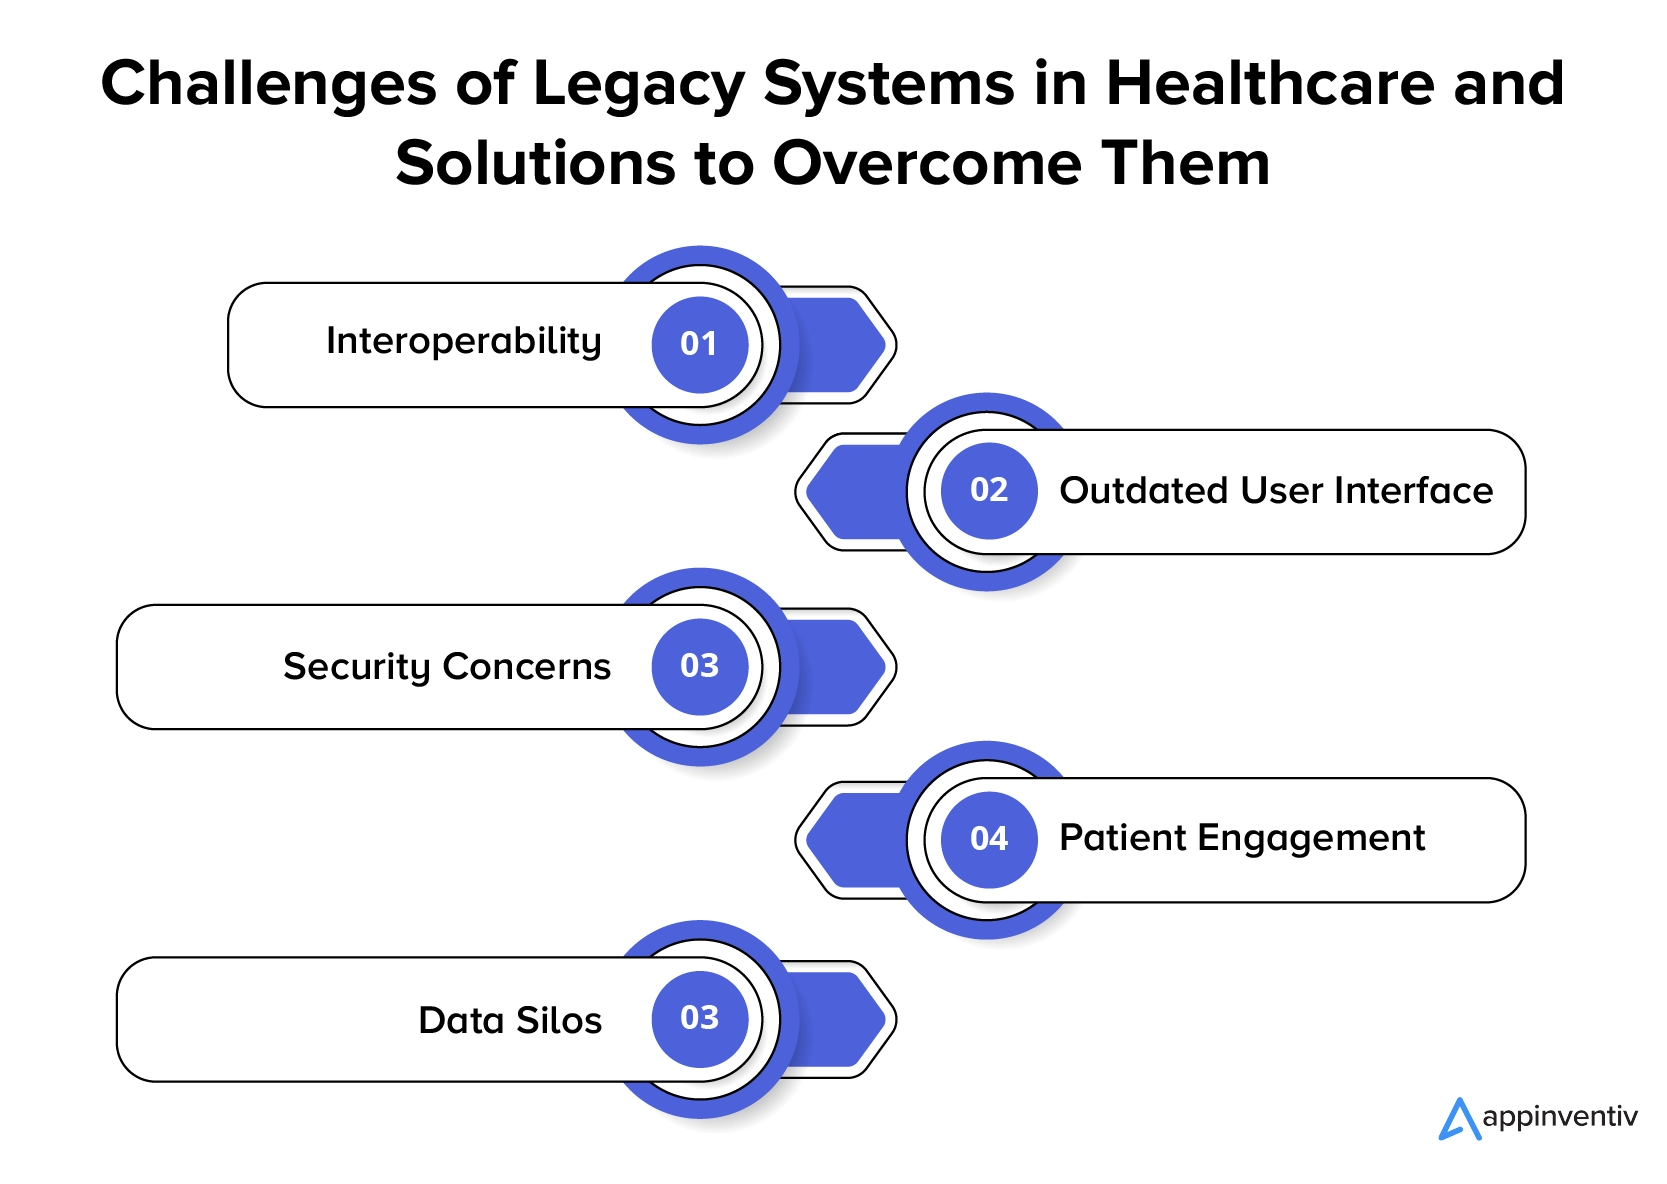 Challenges of Legacy Systems in Healthcare and Solutions to Overcome Them